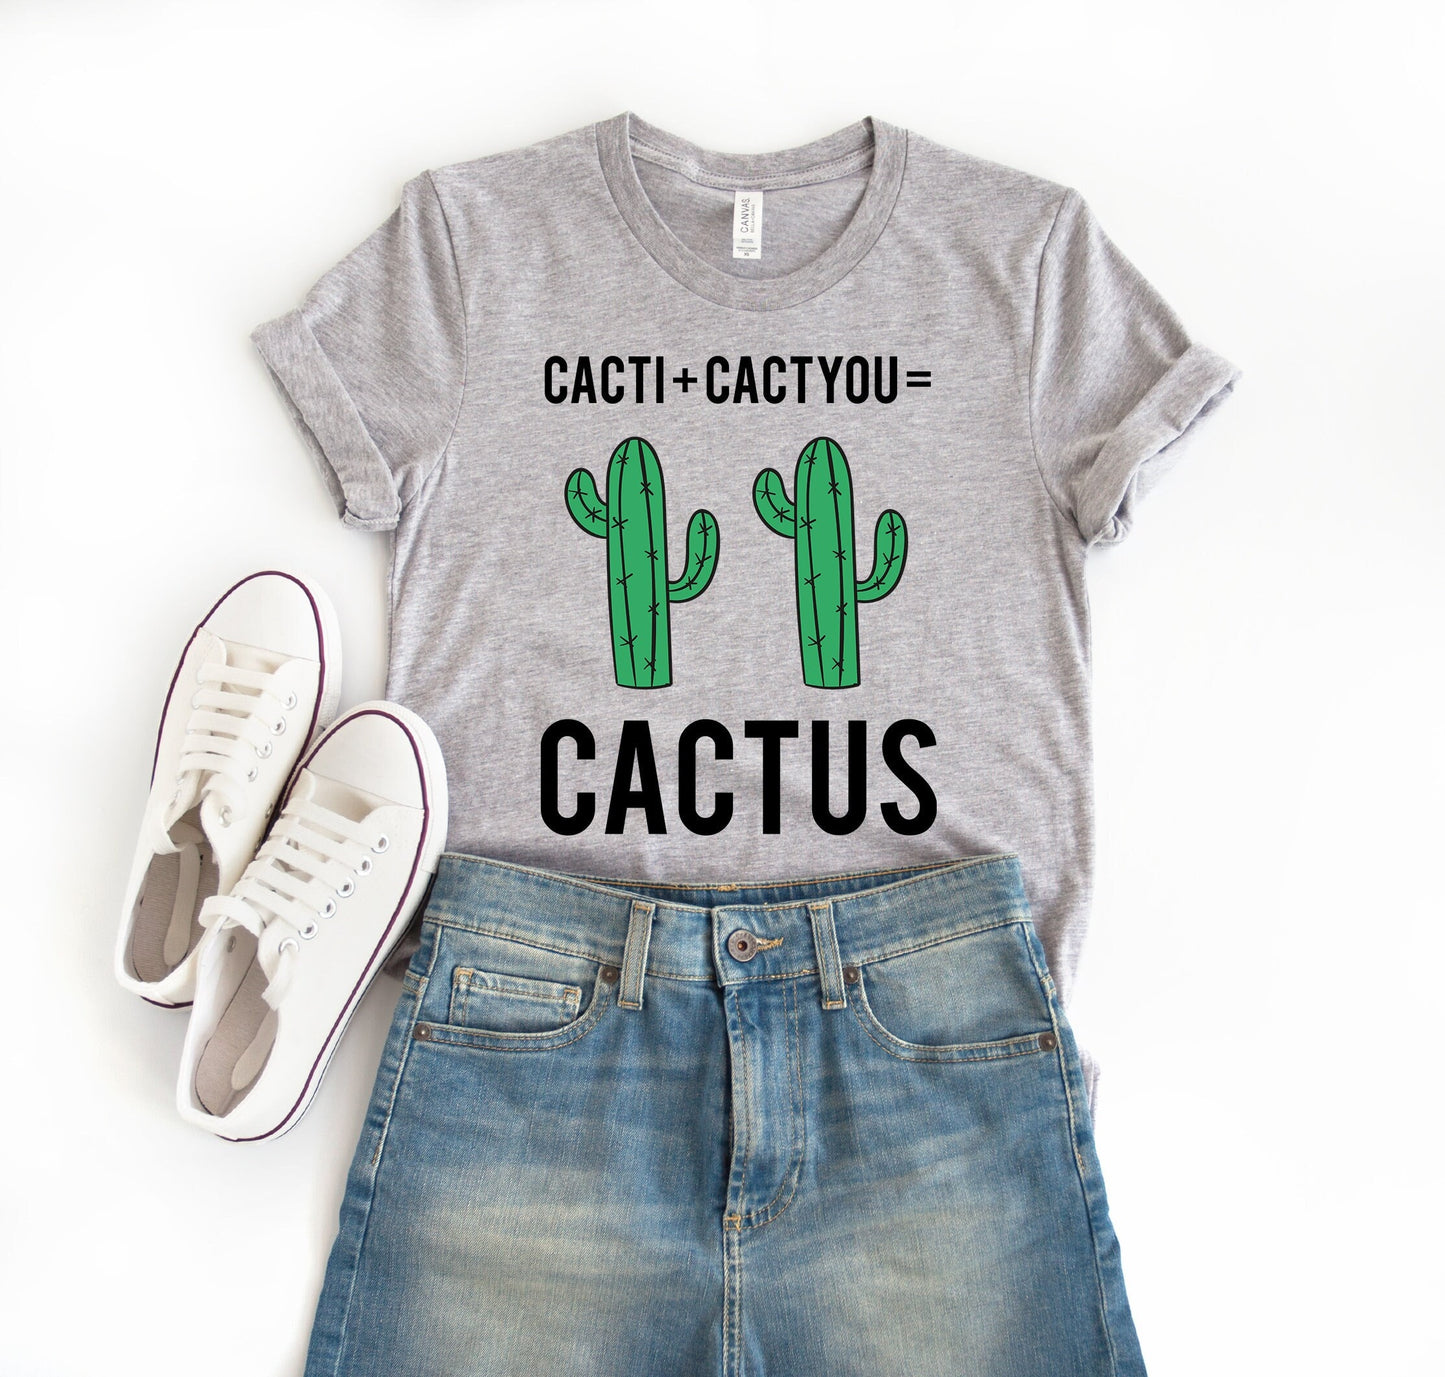 Cacti Cactyou Cactus Funny Desert Pun Ultra Soft Graphic Tee Unisex Soft Tee T-shirt for Women or Men